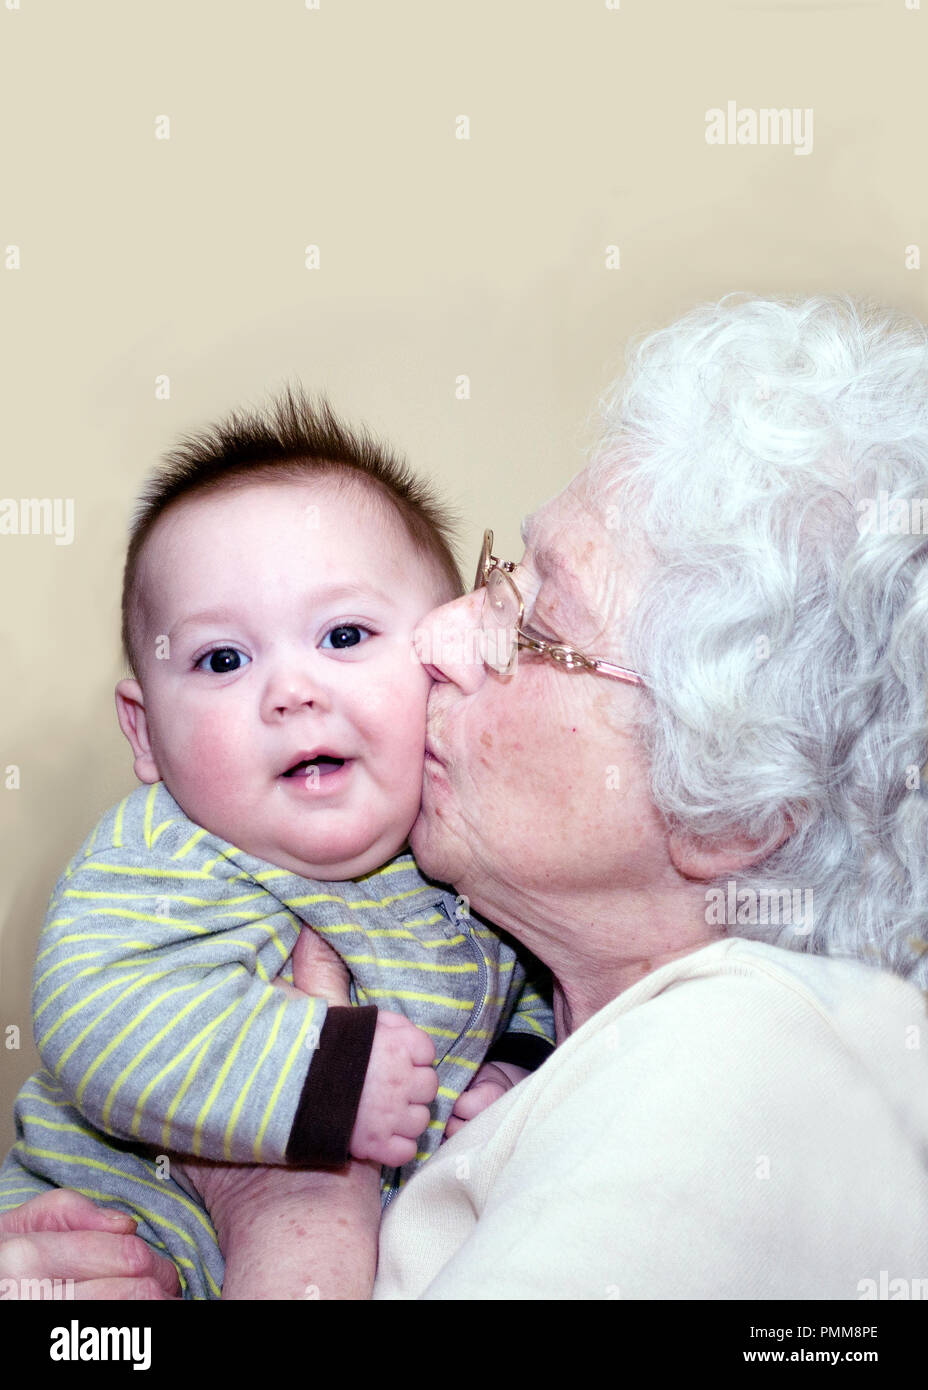 Grandma kissing chubby cheeks of a baby who is smiling with happiness Stock Photo